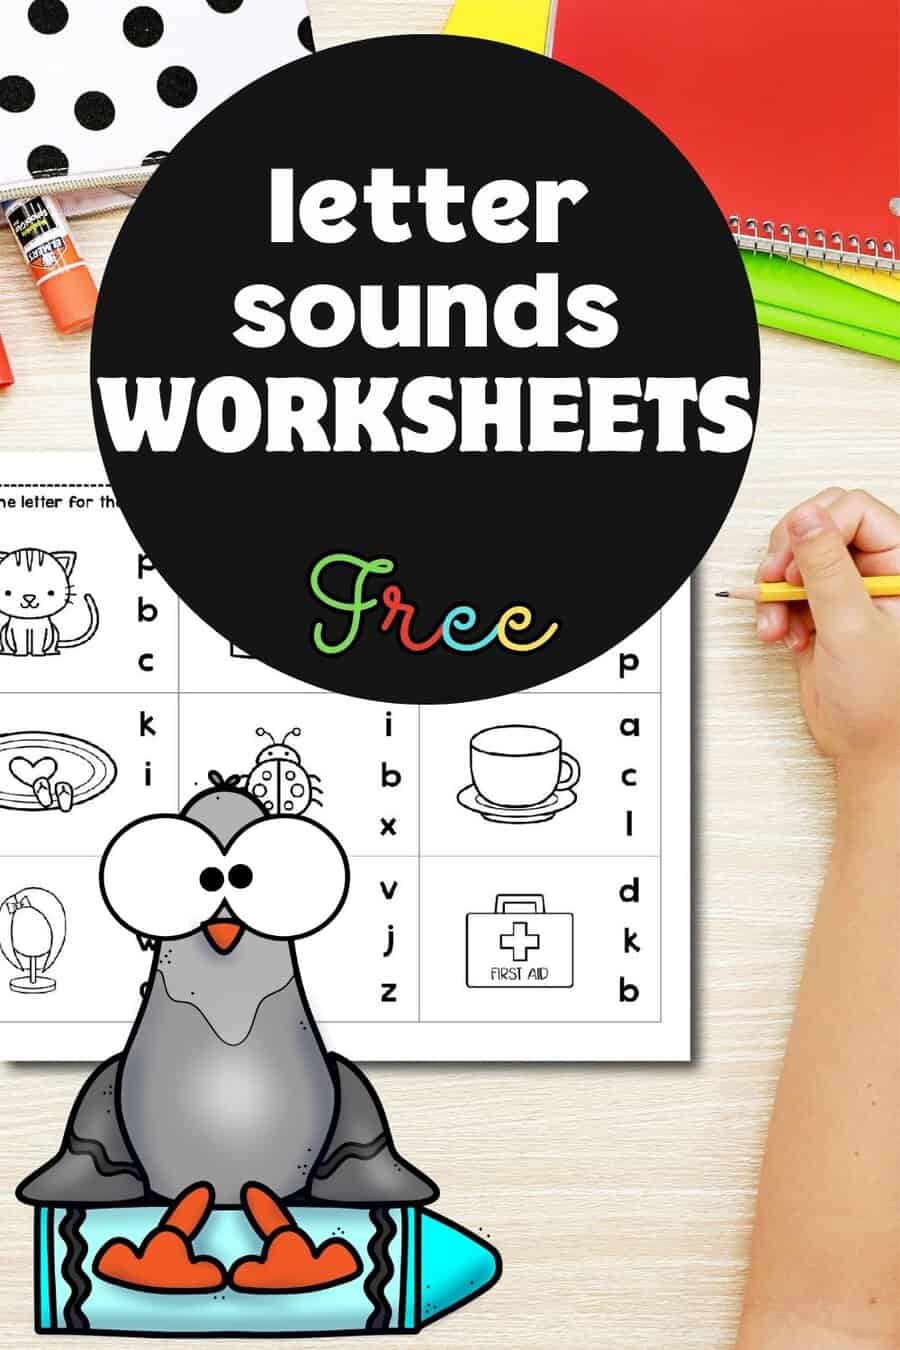 Free beginning sounds worksheets activity for kindergarten and preschool. Teach your kids beginning sounds with this fun and hands on phonics activity.